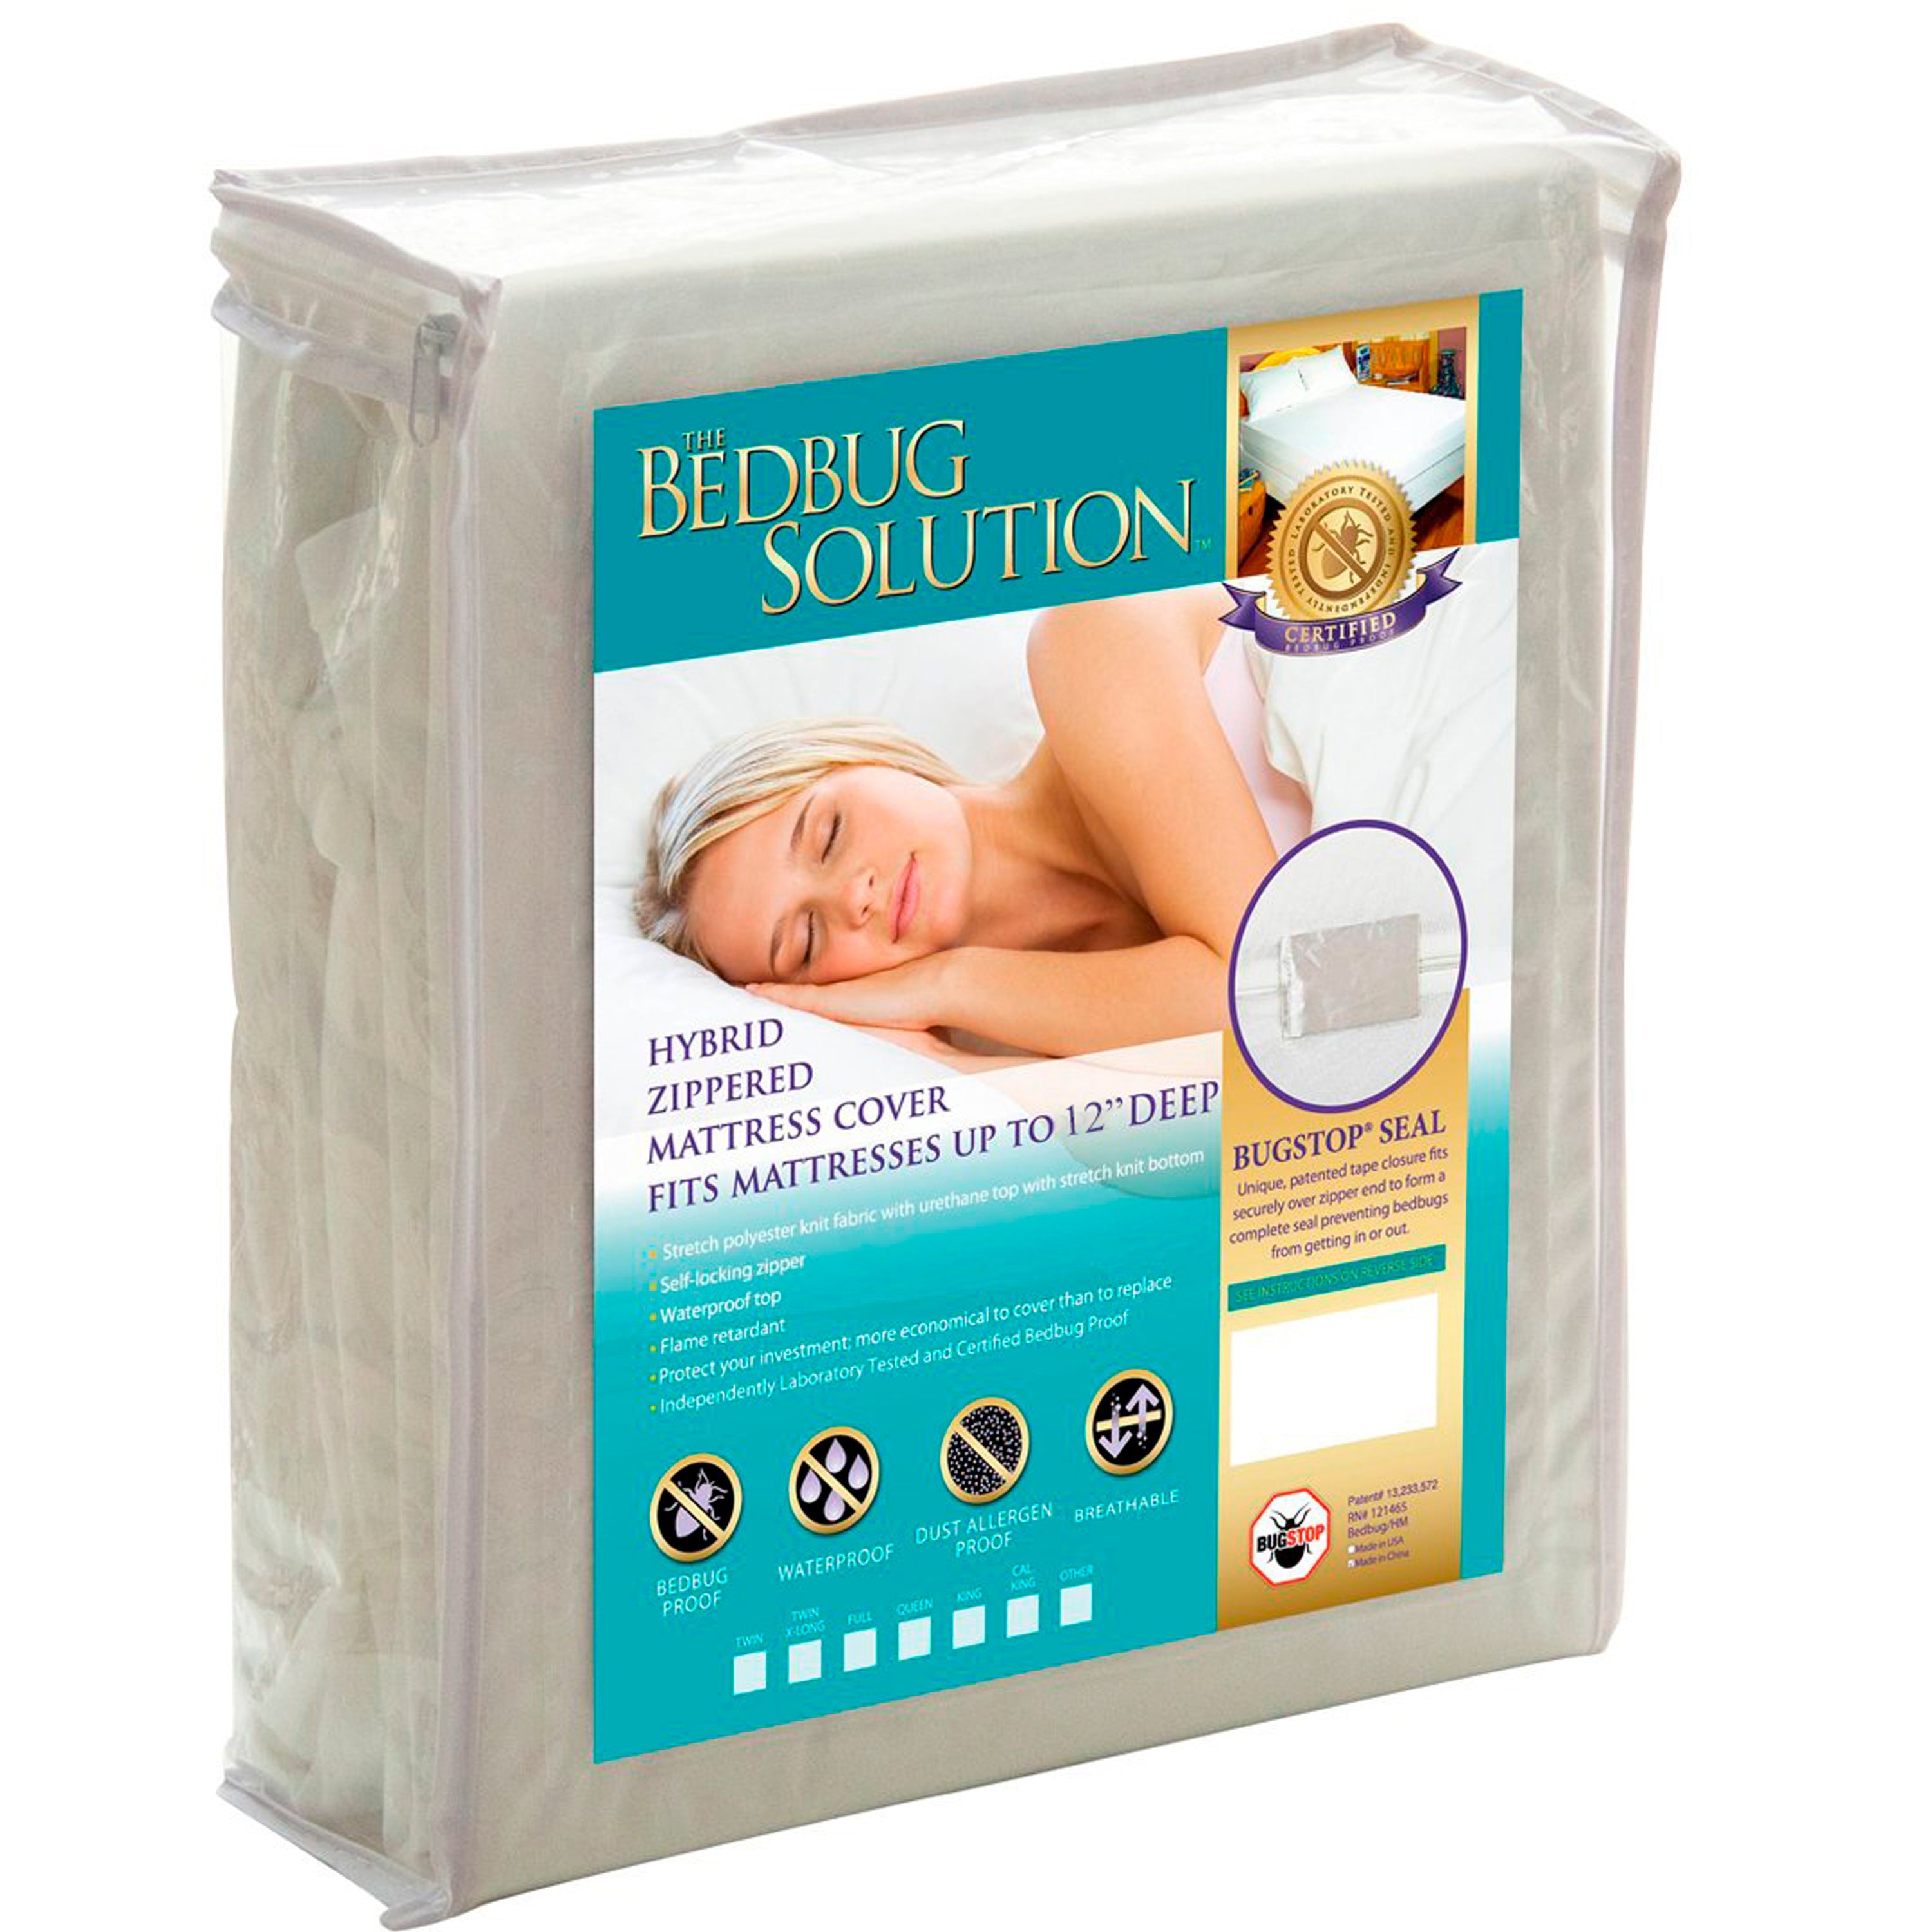 BedBug Solution™ Hybrid Zippered Mattress Encasing - Stretches To Fit 9-12" Mattresses Zippered Mattress Protector / Cover Bargoose Home Textiles, Inc. 